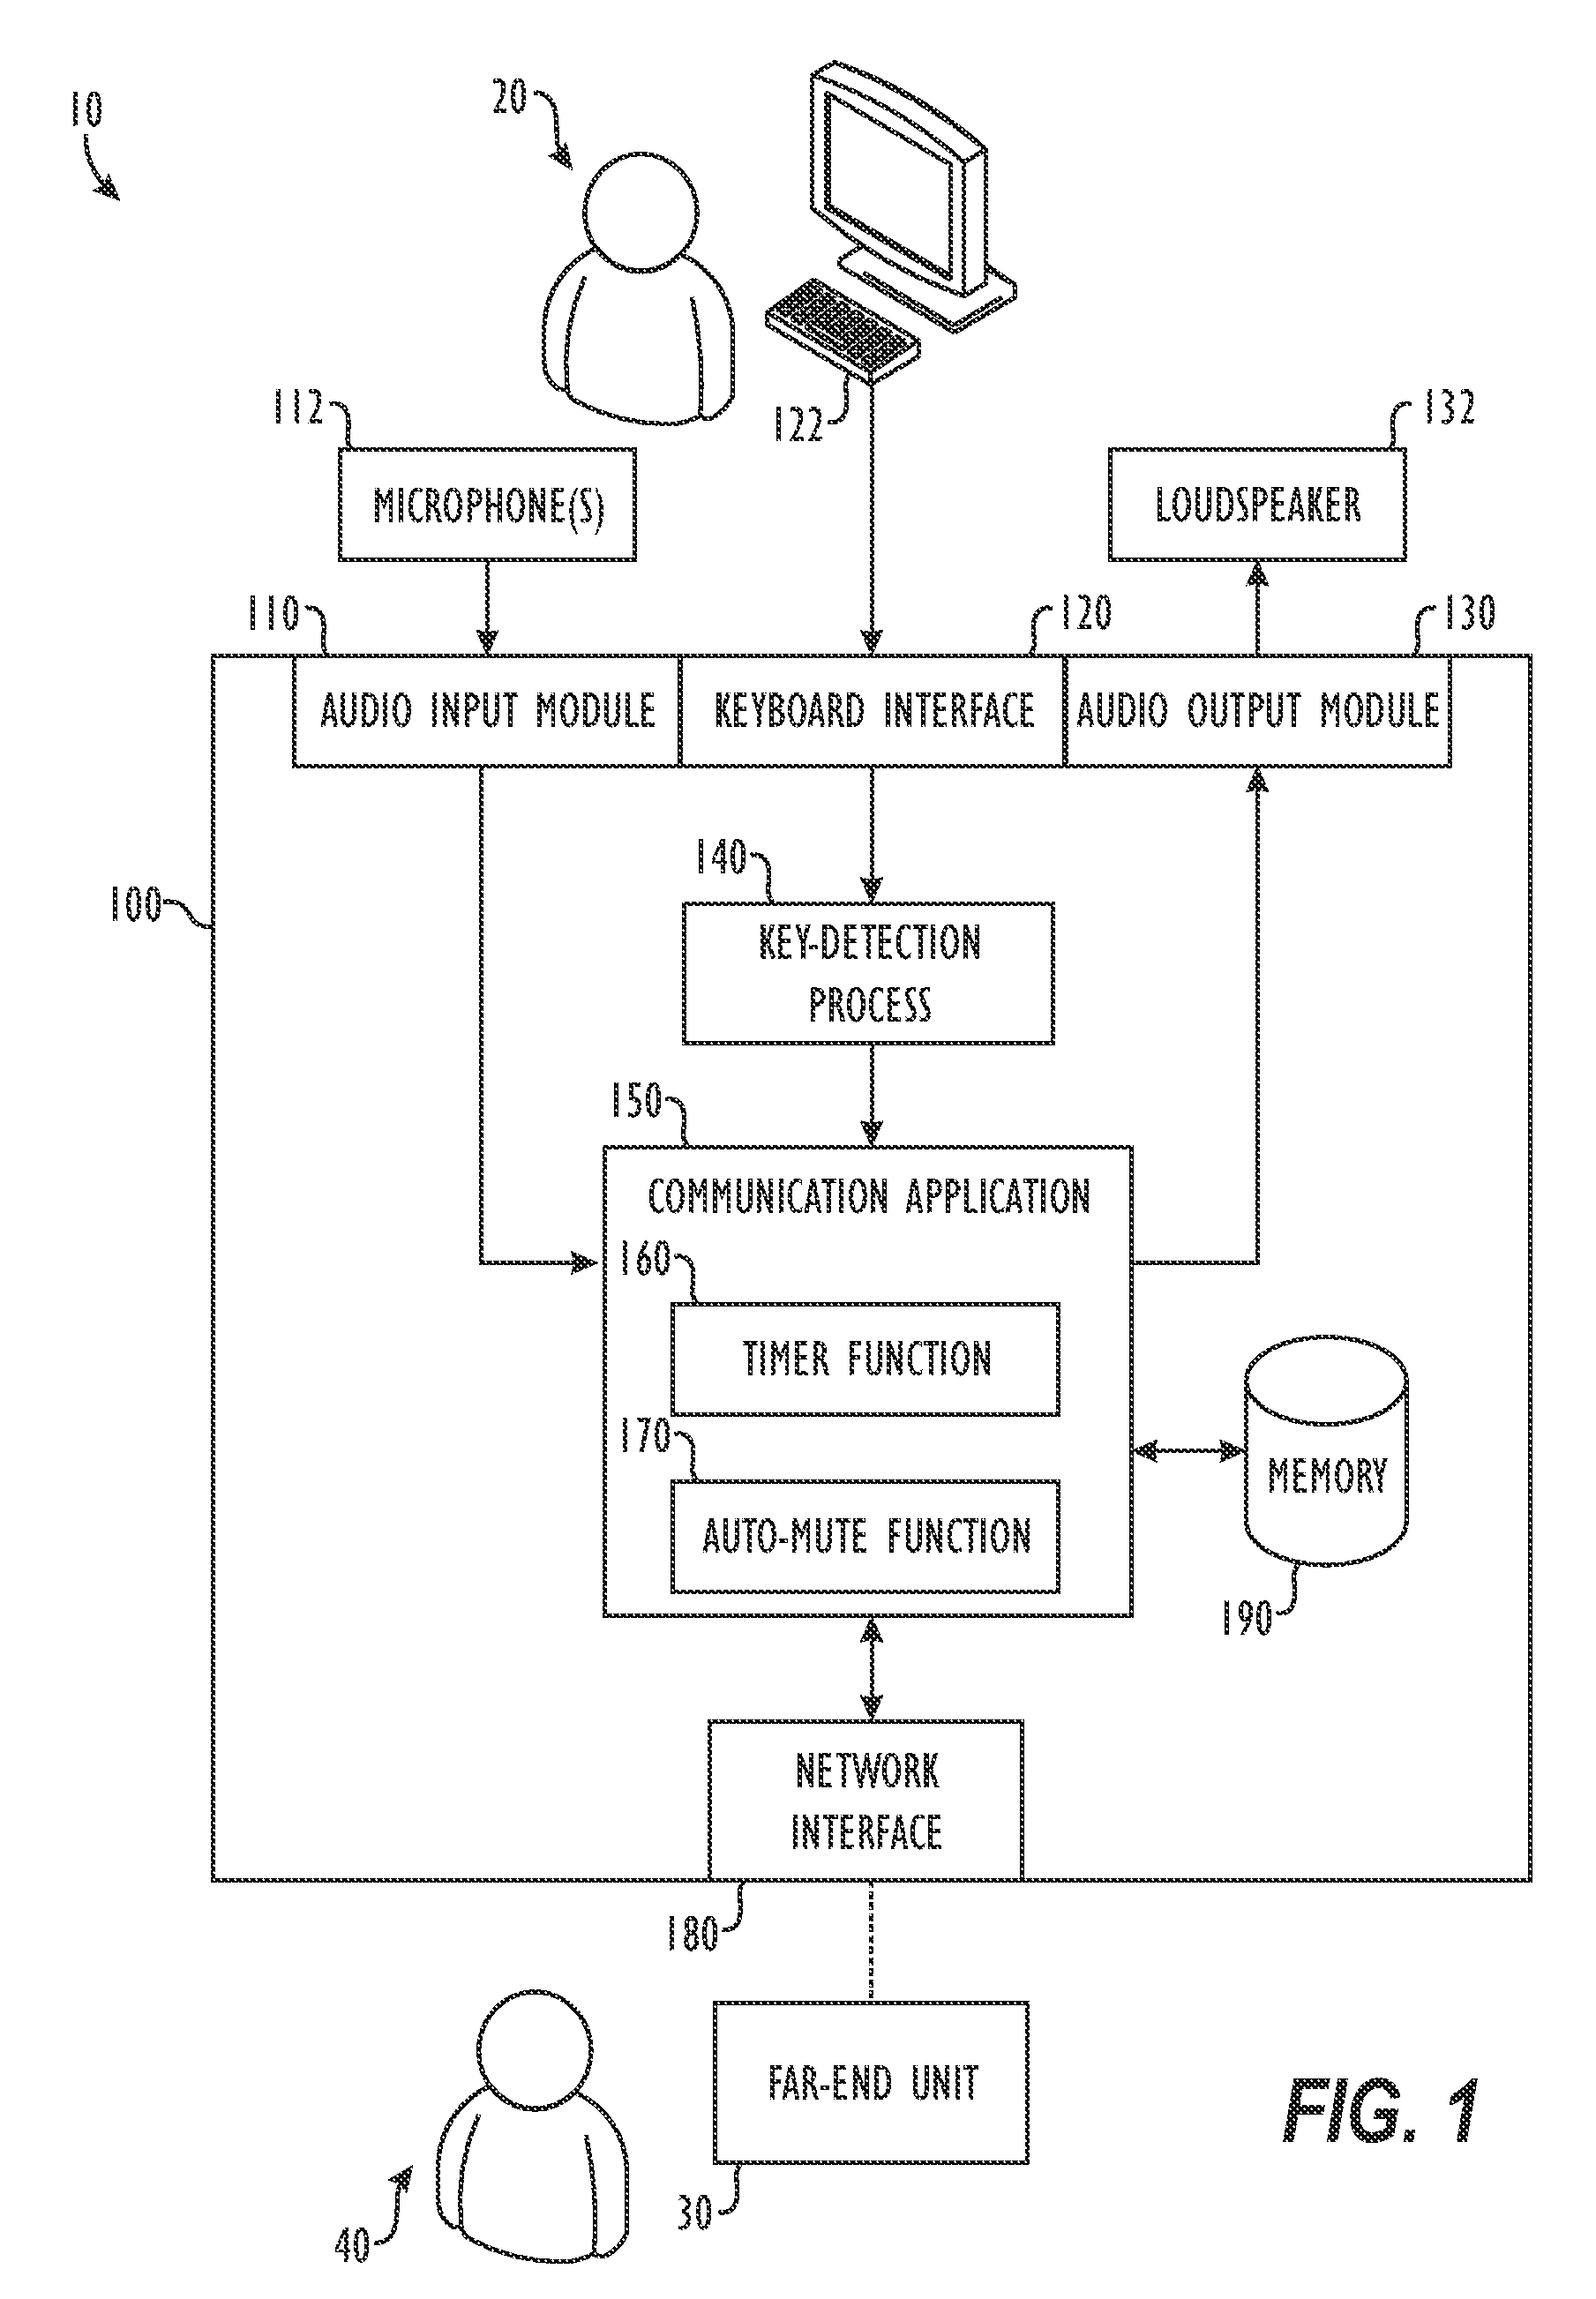 Method and Apparatus for Automatically Suppressing Computer Keyboard Noises in Audio Telecommunication Session